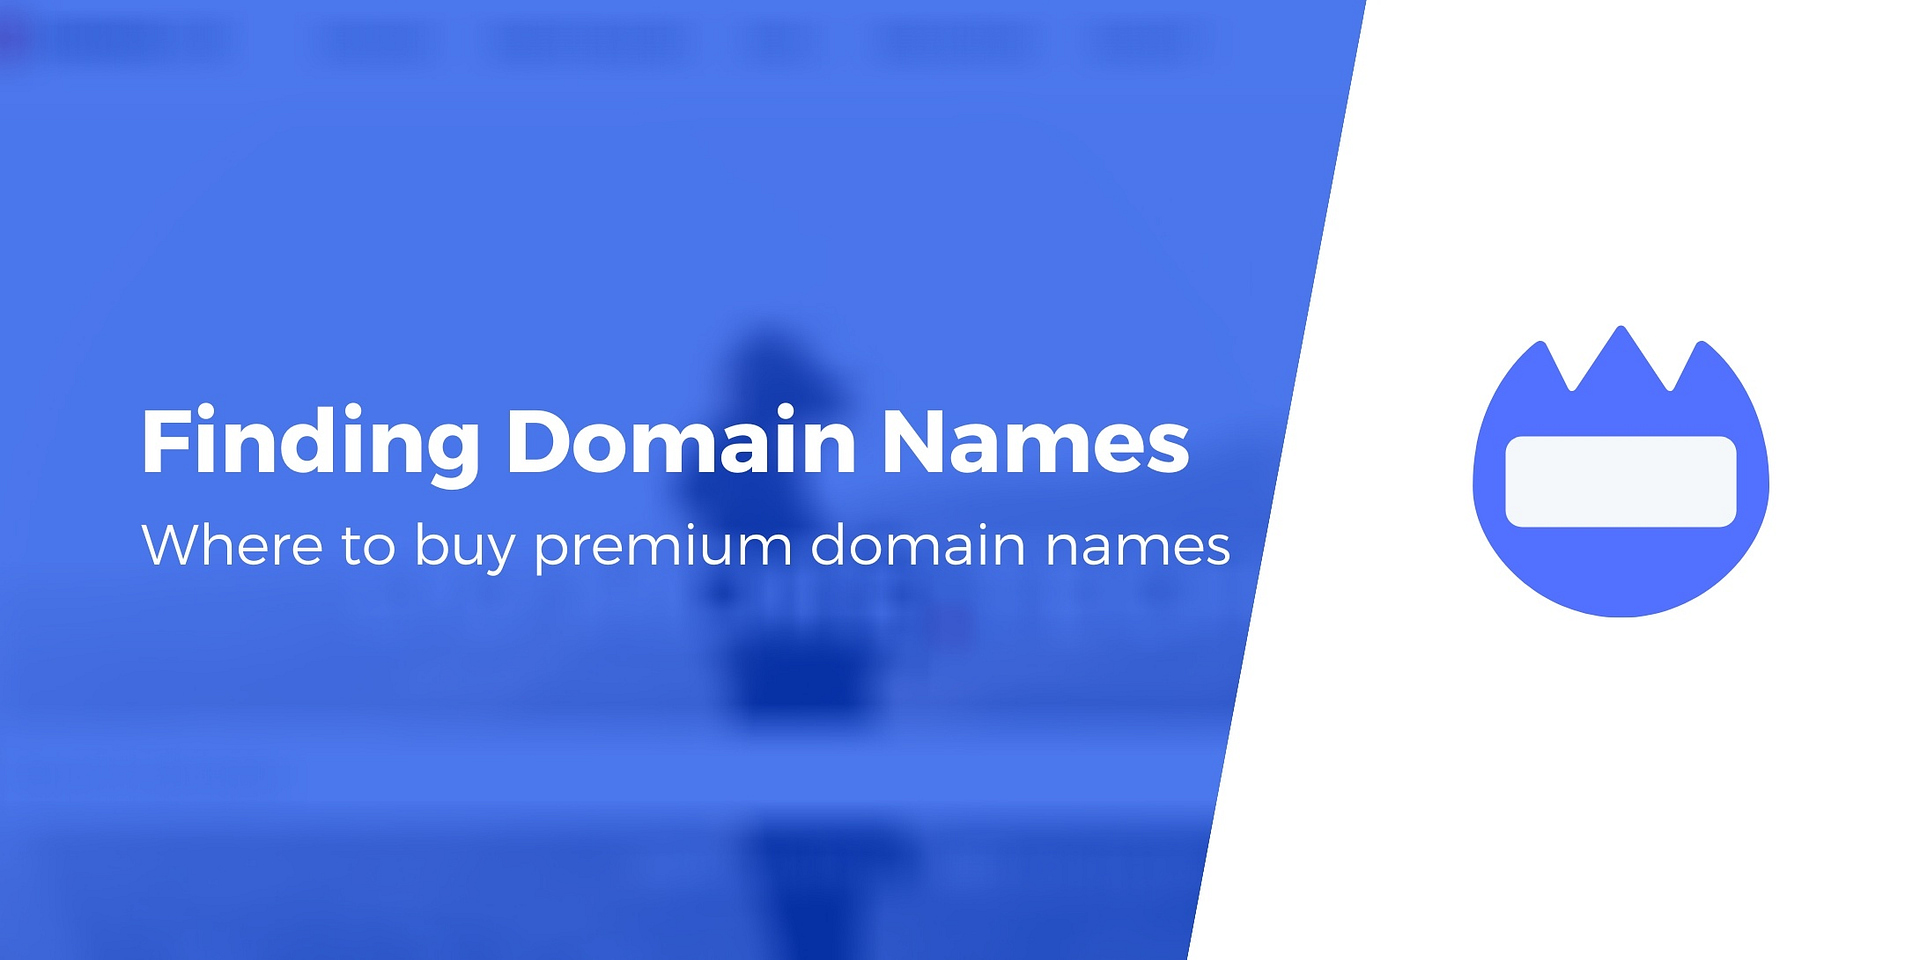 Bootstrap Business: Discounts Domains - Buy Discounted Domain Names And Websites